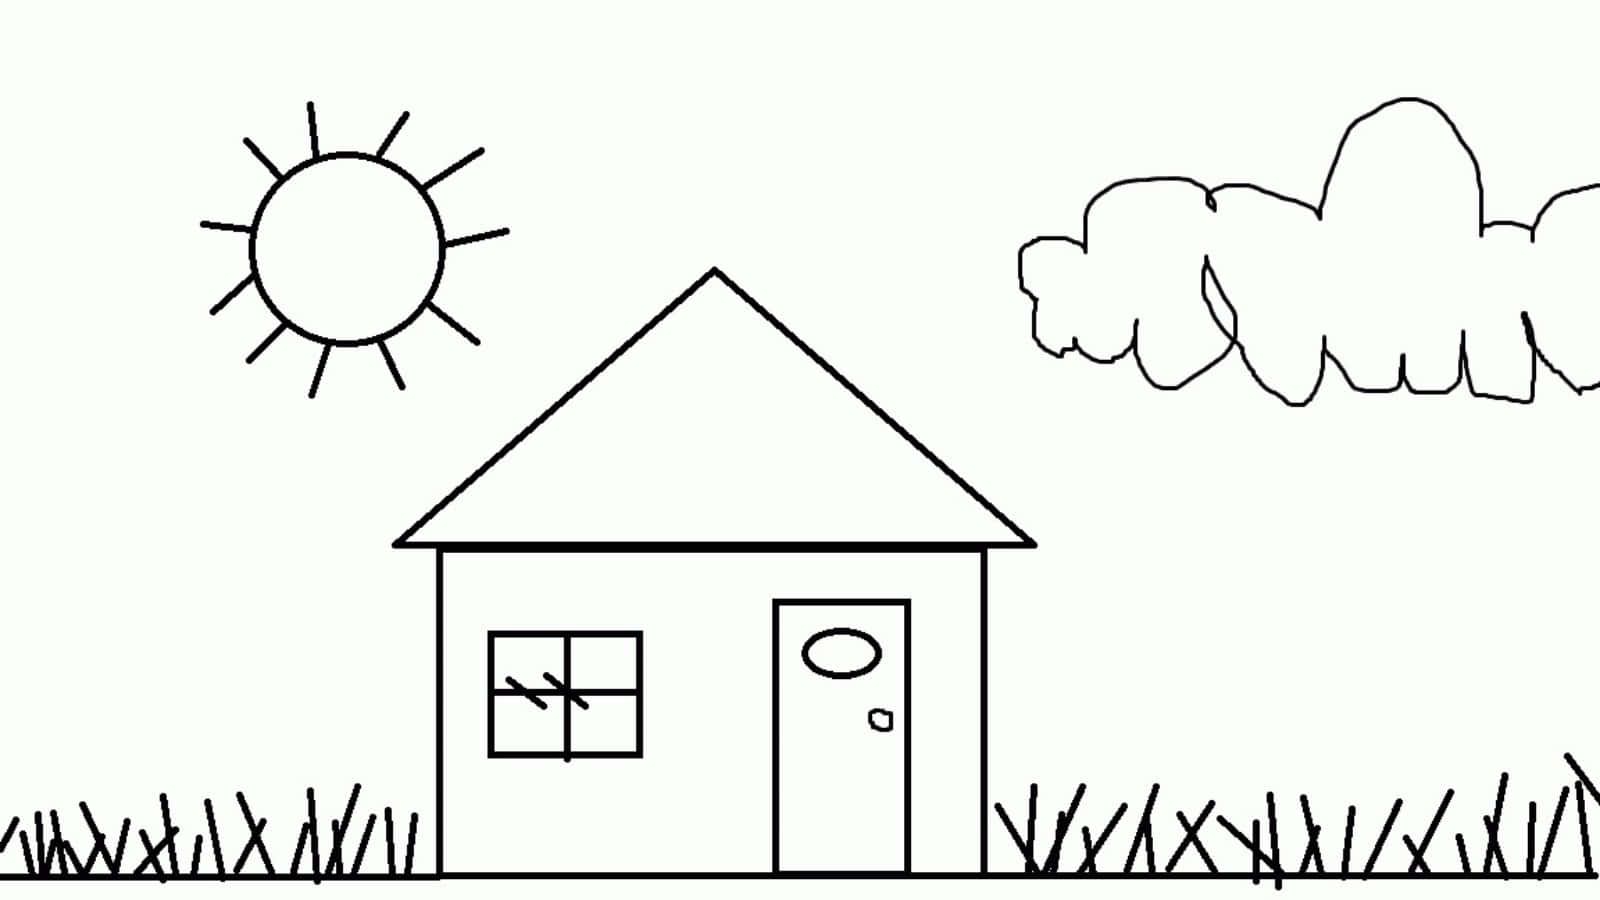 How to Draw House and House Coloring Pages  Coloring House for kids step  by step  YouTube